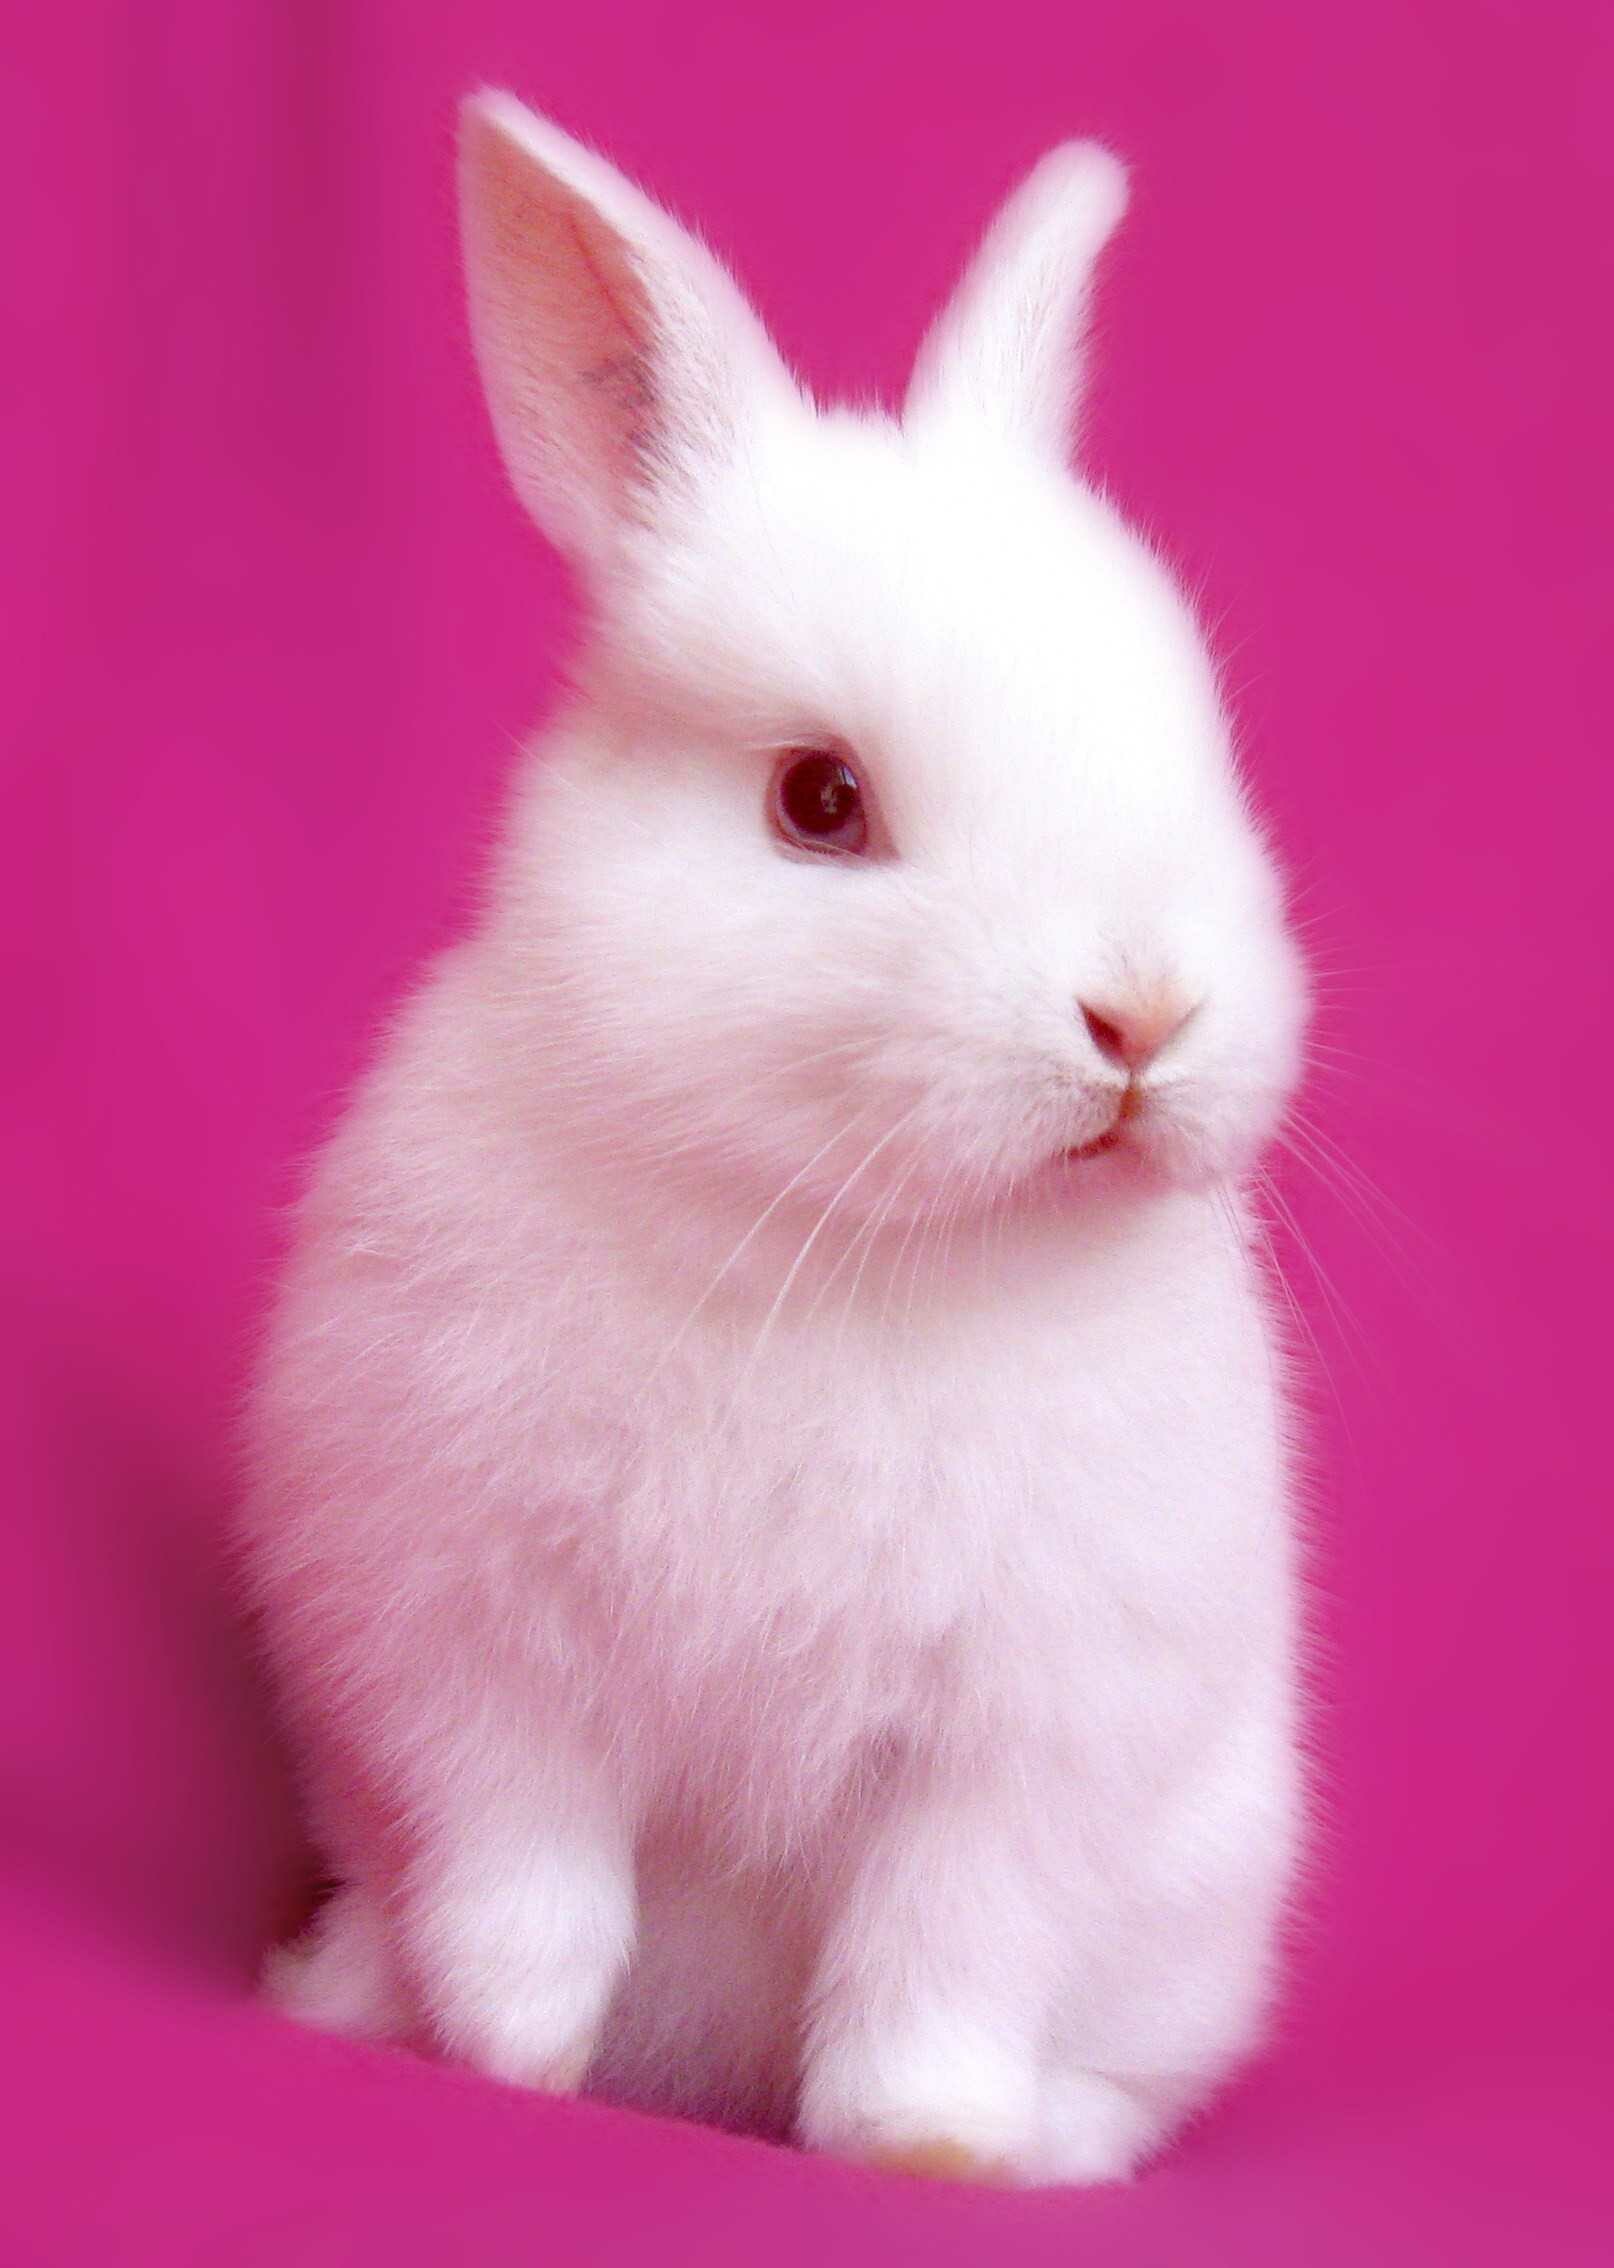 Rabbit: A small furry animal with long ears. 1620x2270 HD Wallpaper.